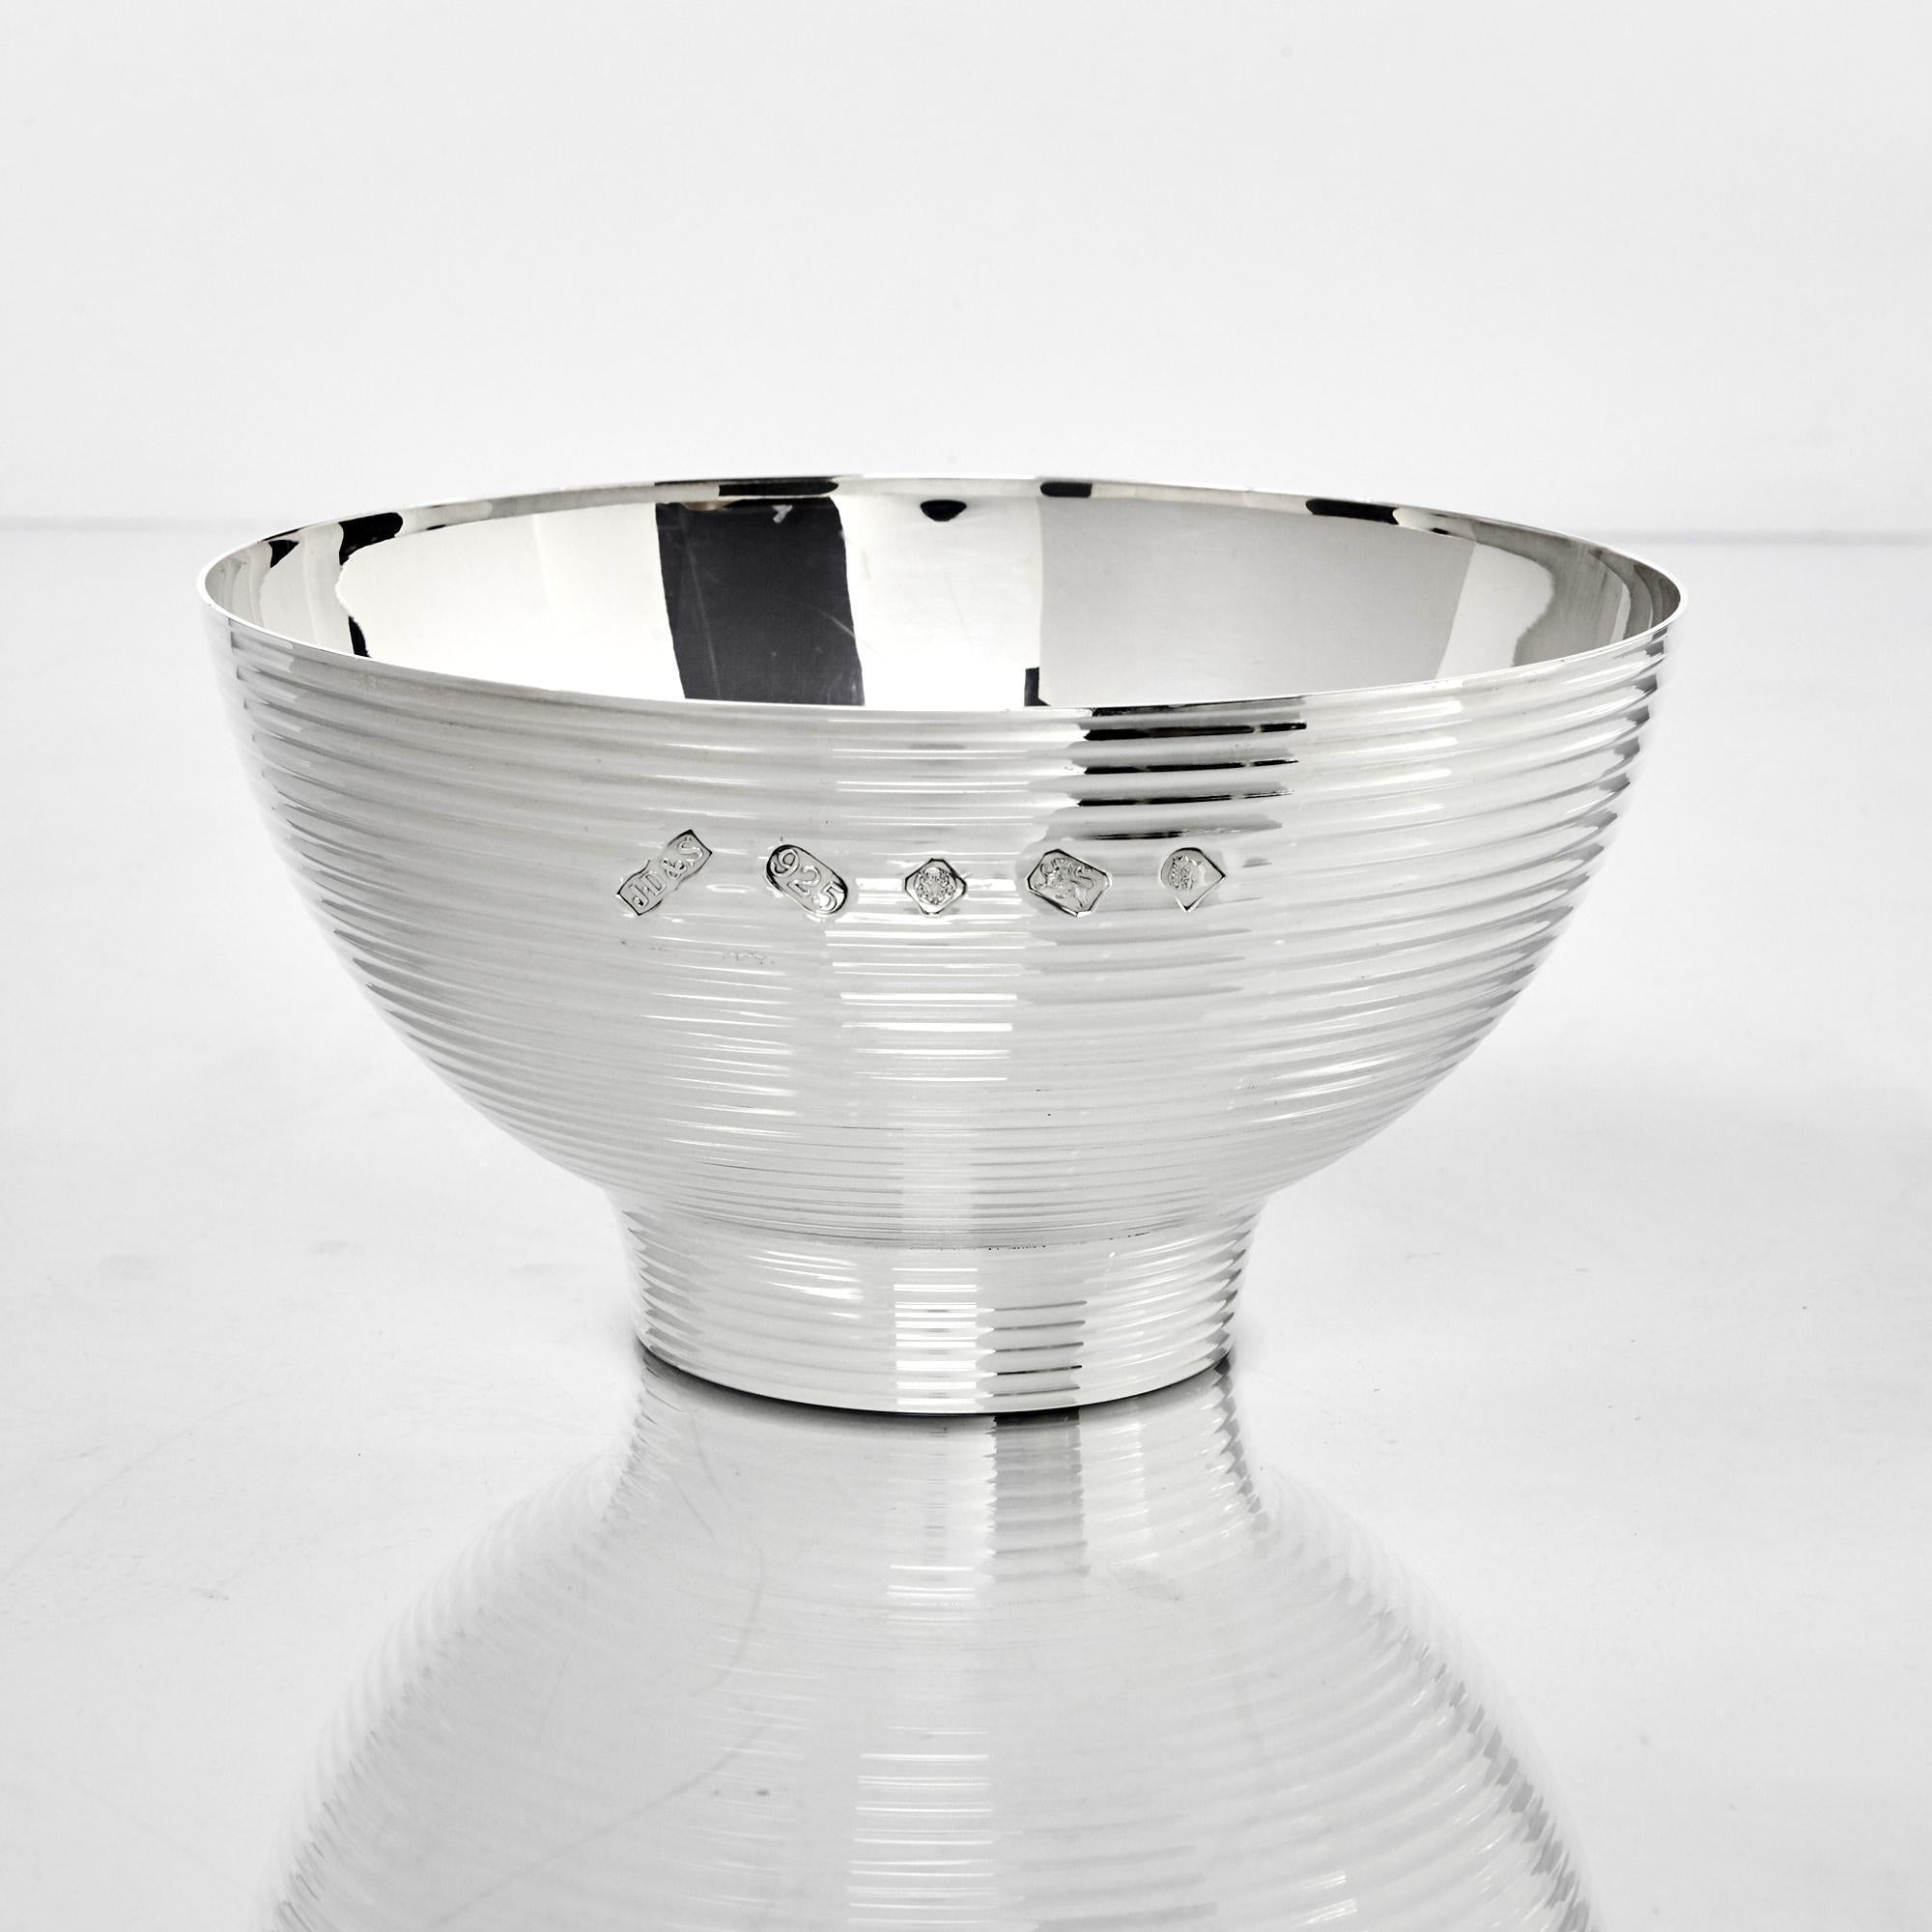 Silver rose bowl of contemporary design. The exterior has stepped and graduated ribbing and the inside has a brightly polished smooth interior. It is stamped with Queen Elizabeth II's commemorative Silver Jubilee hallmark, marking the 25th